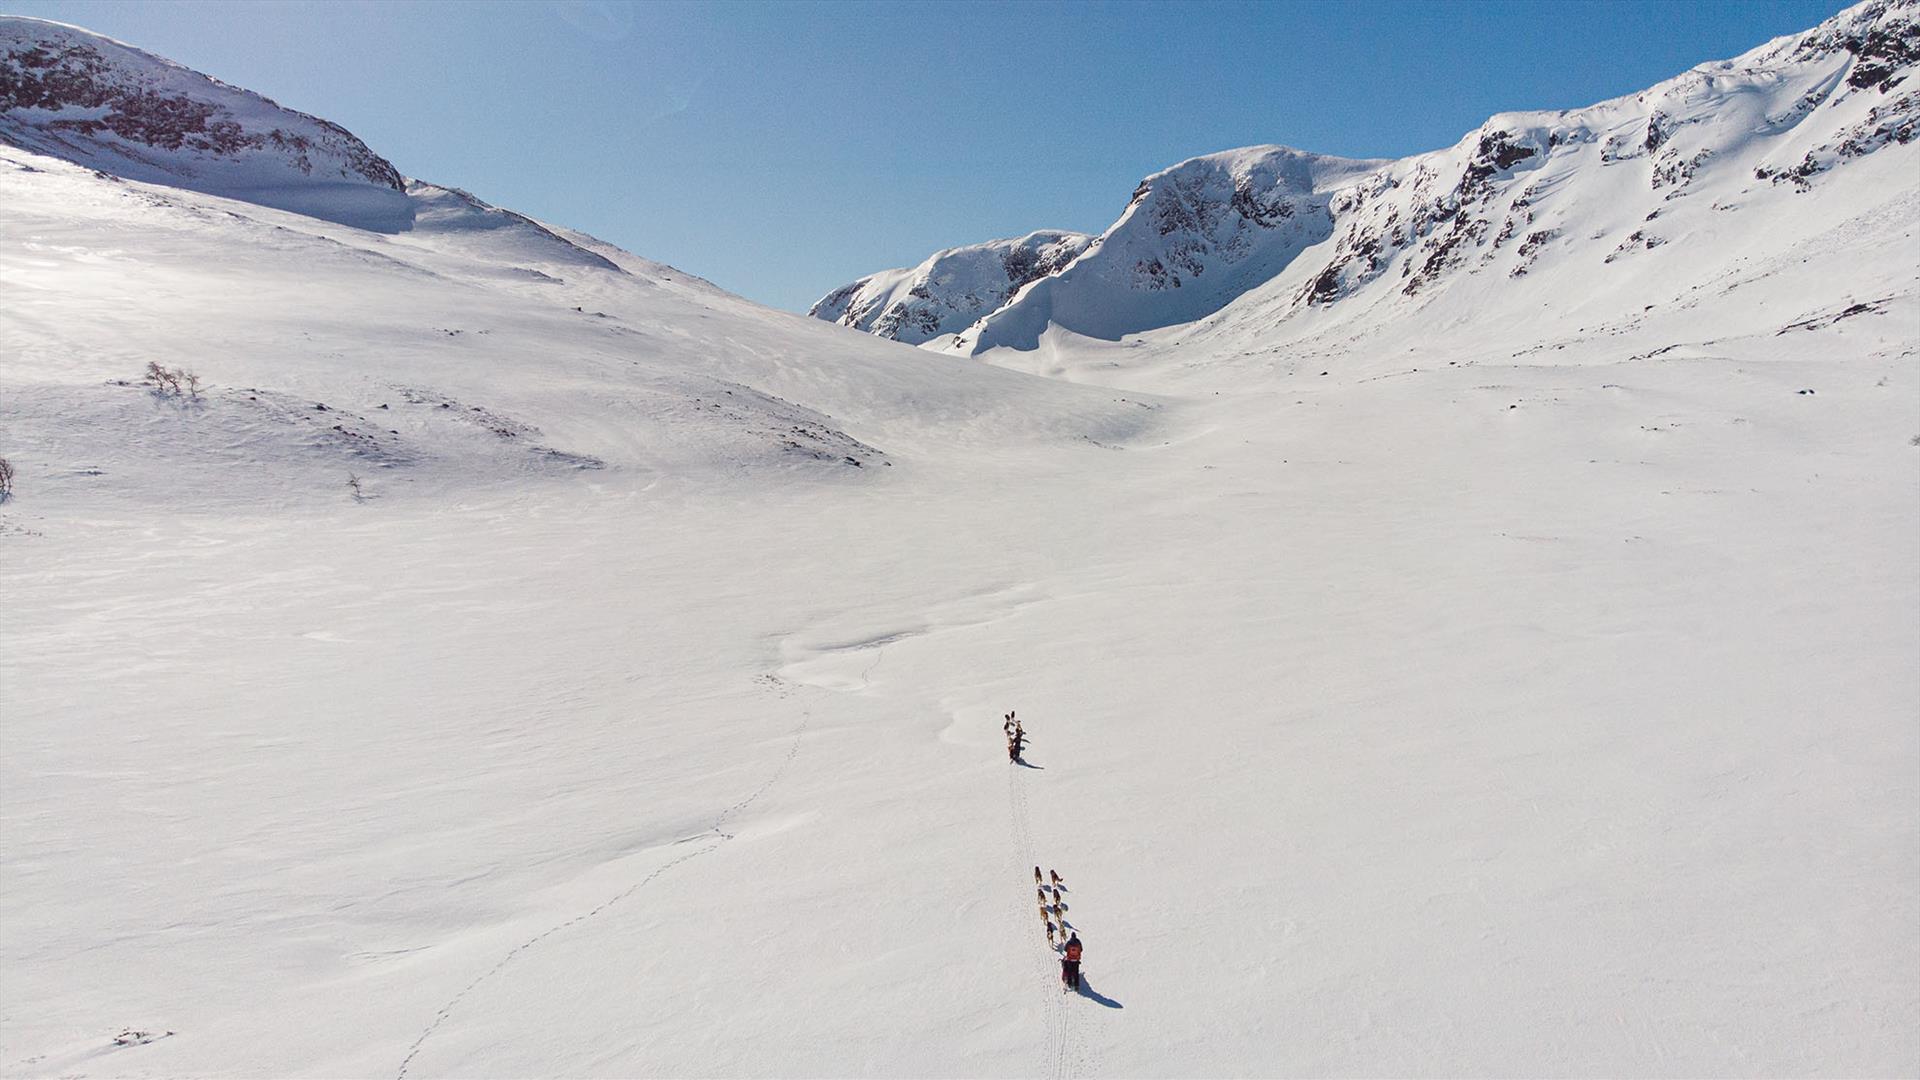 Drone image of two dog sledding teams that are dwarfed by the surrounding mountain landscape. They are heading up a mountain valley.